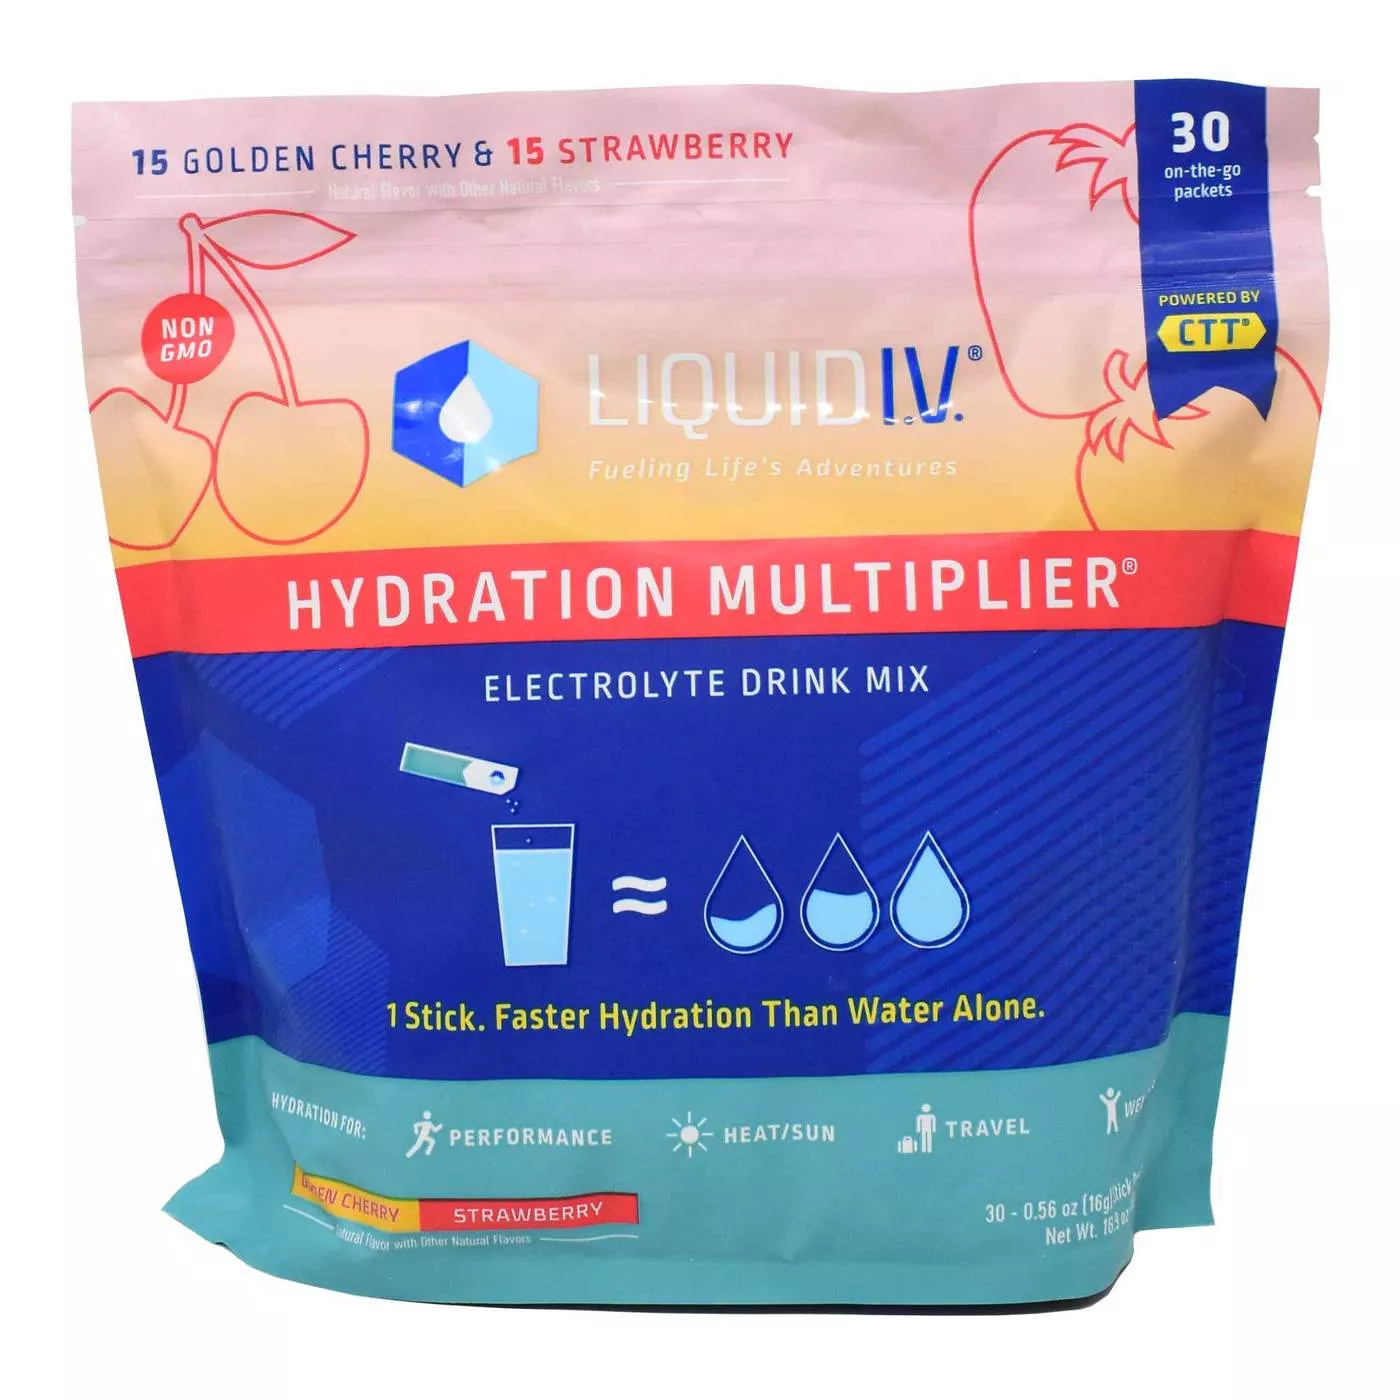 Liquid IV Hydration Multiplier, Golden Cherry and Strawberry - 30 Packets 